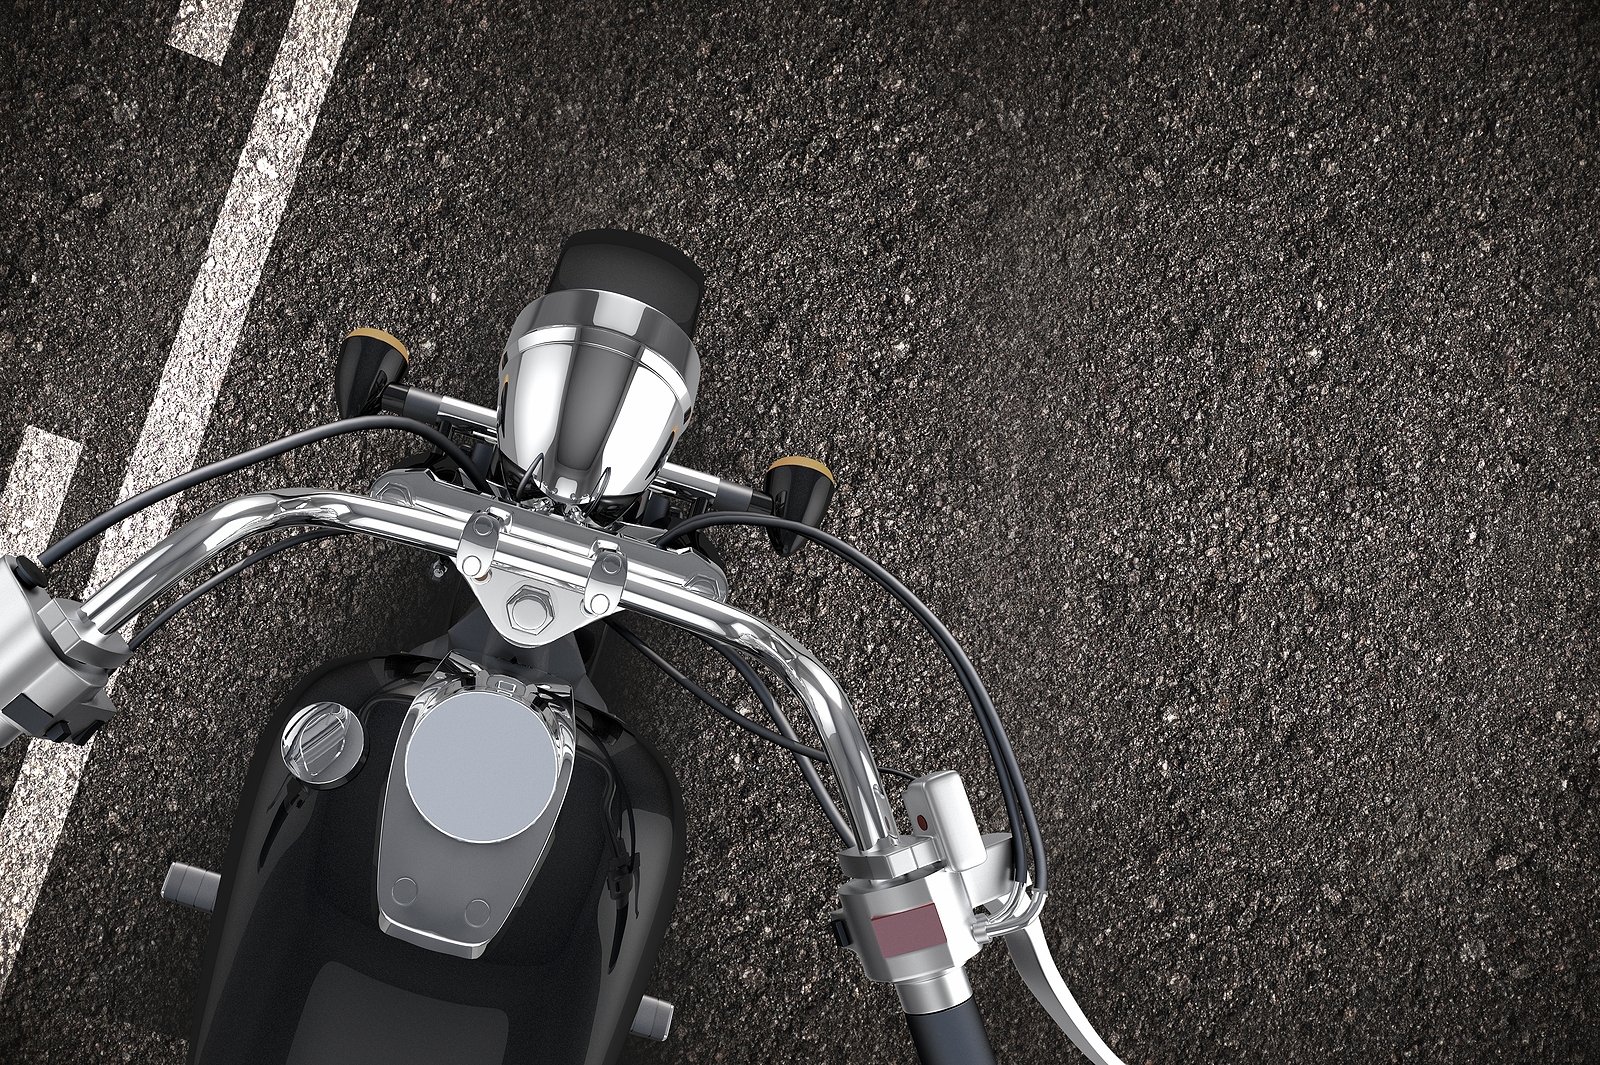 If you’ve been hurt in a motorcycle accident, the steps you take immediately after the accident are crucial for getting fair compensation and justice for your accident. Knowing what to do after a motorcycle accident is something every motorist should know